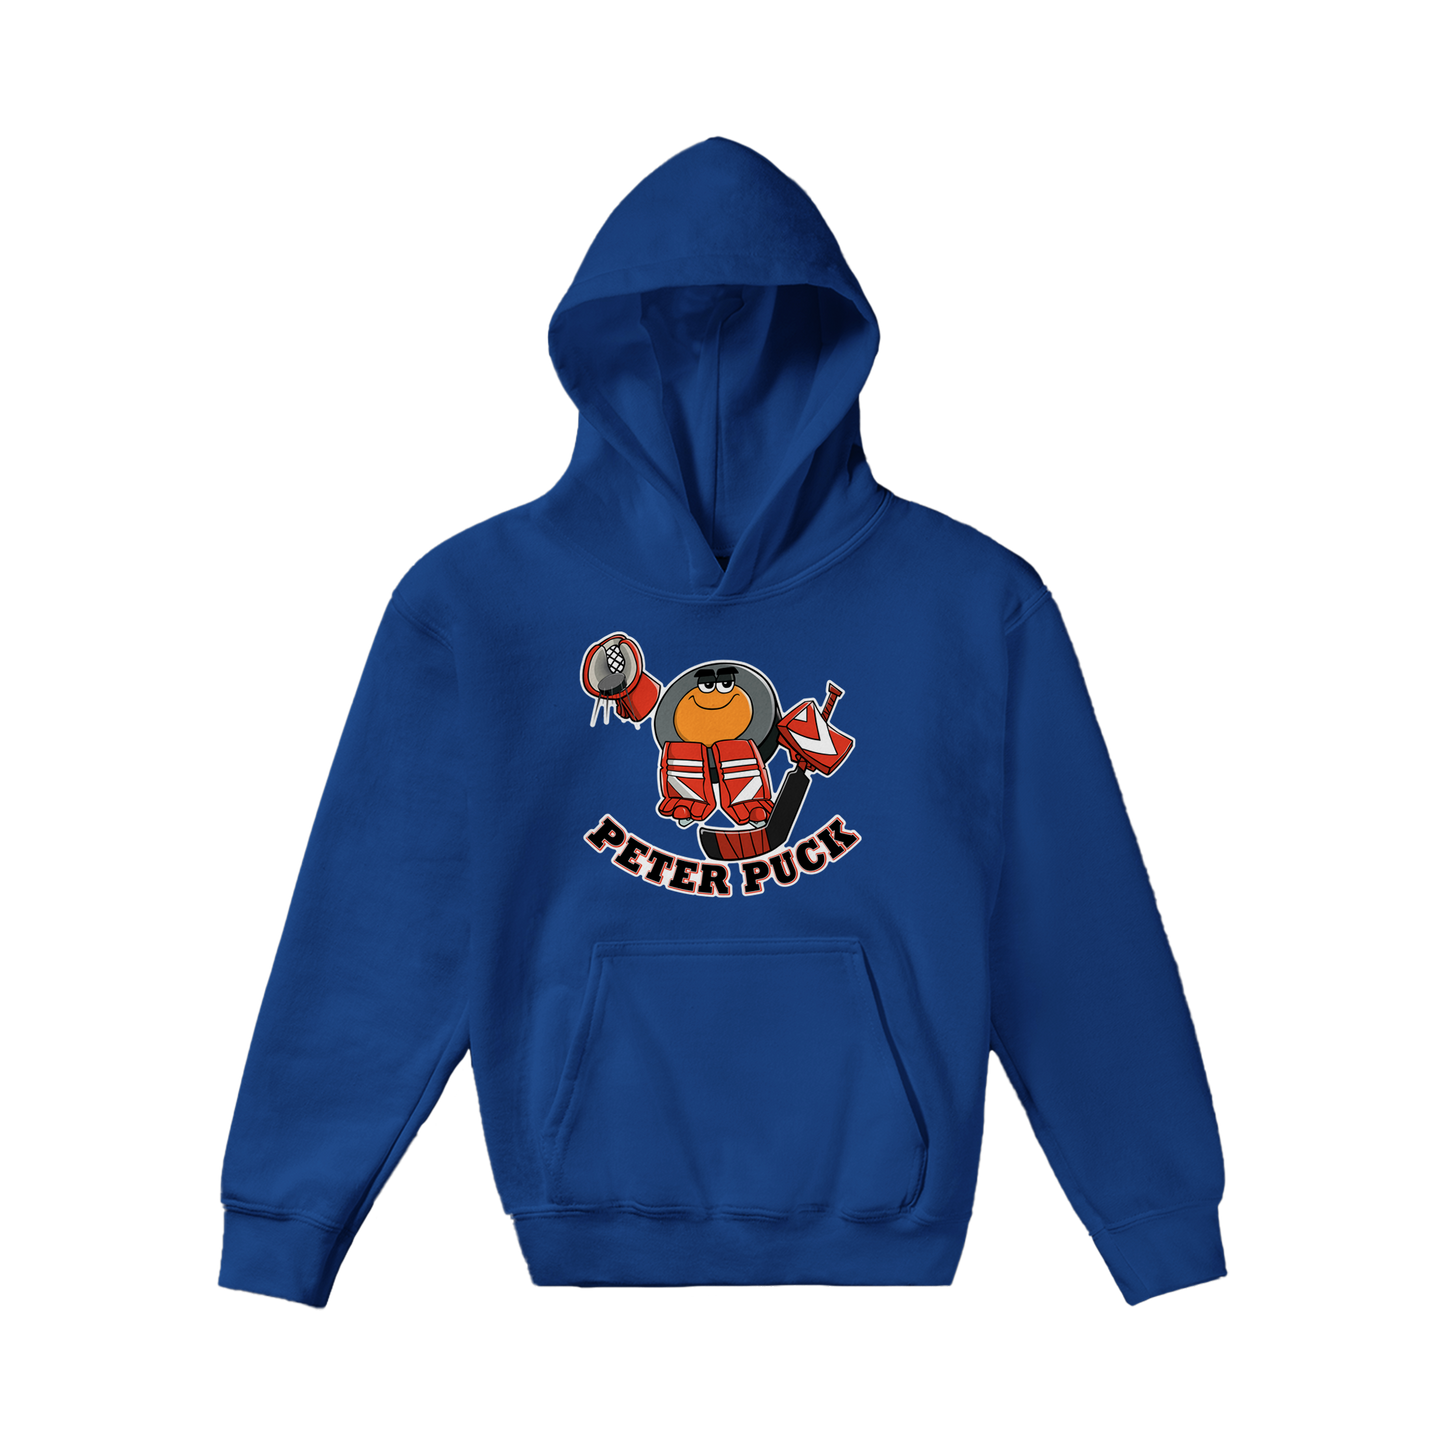 Peter Puck Goalie Save Classic Kids Pullover Hoodie